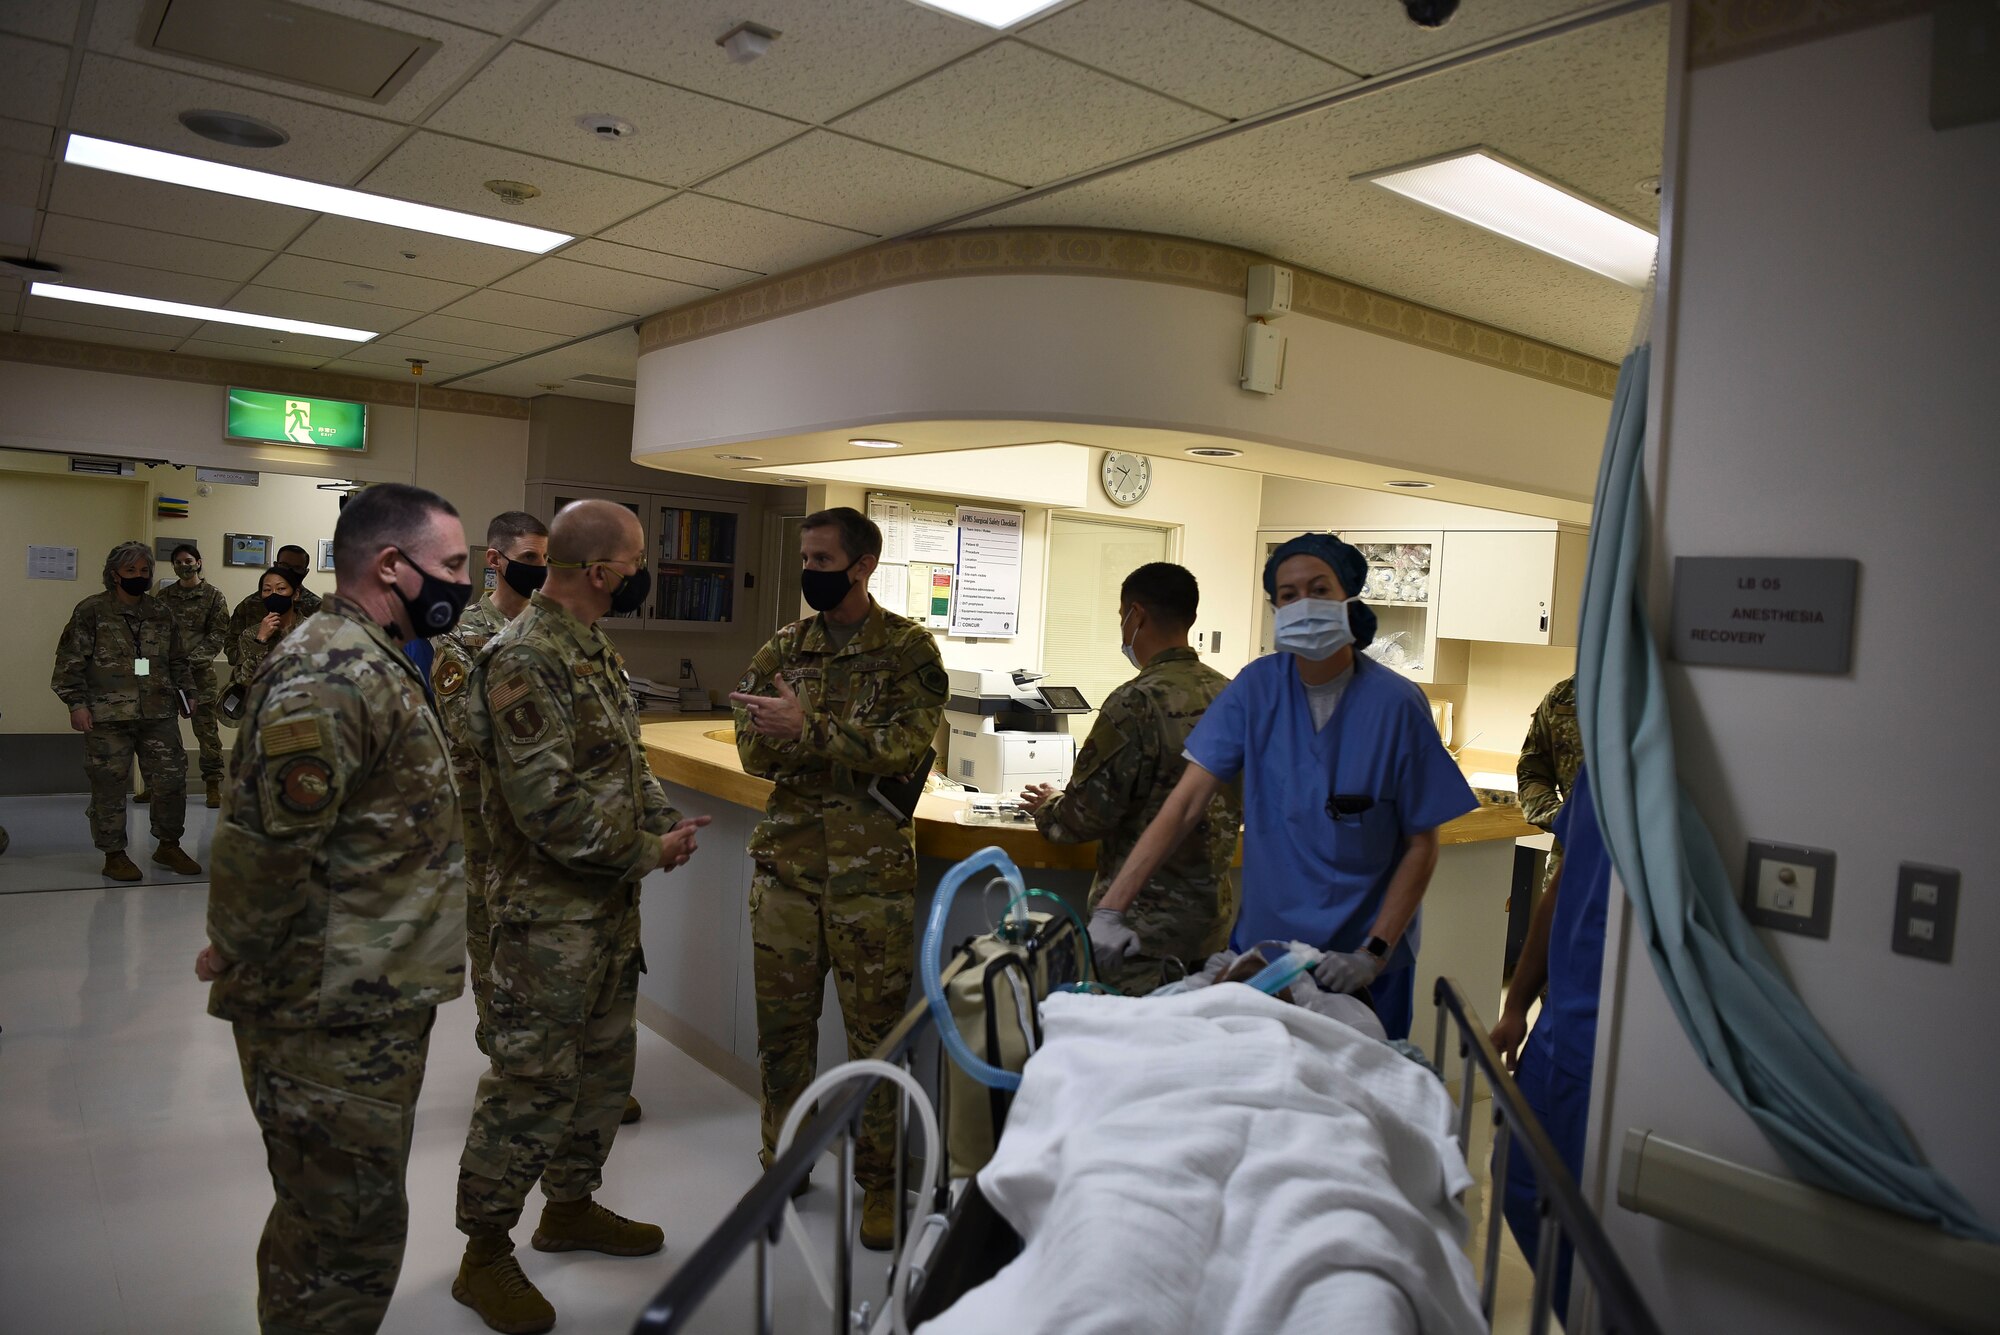 A nurse wheels a person past military members in a hospital.